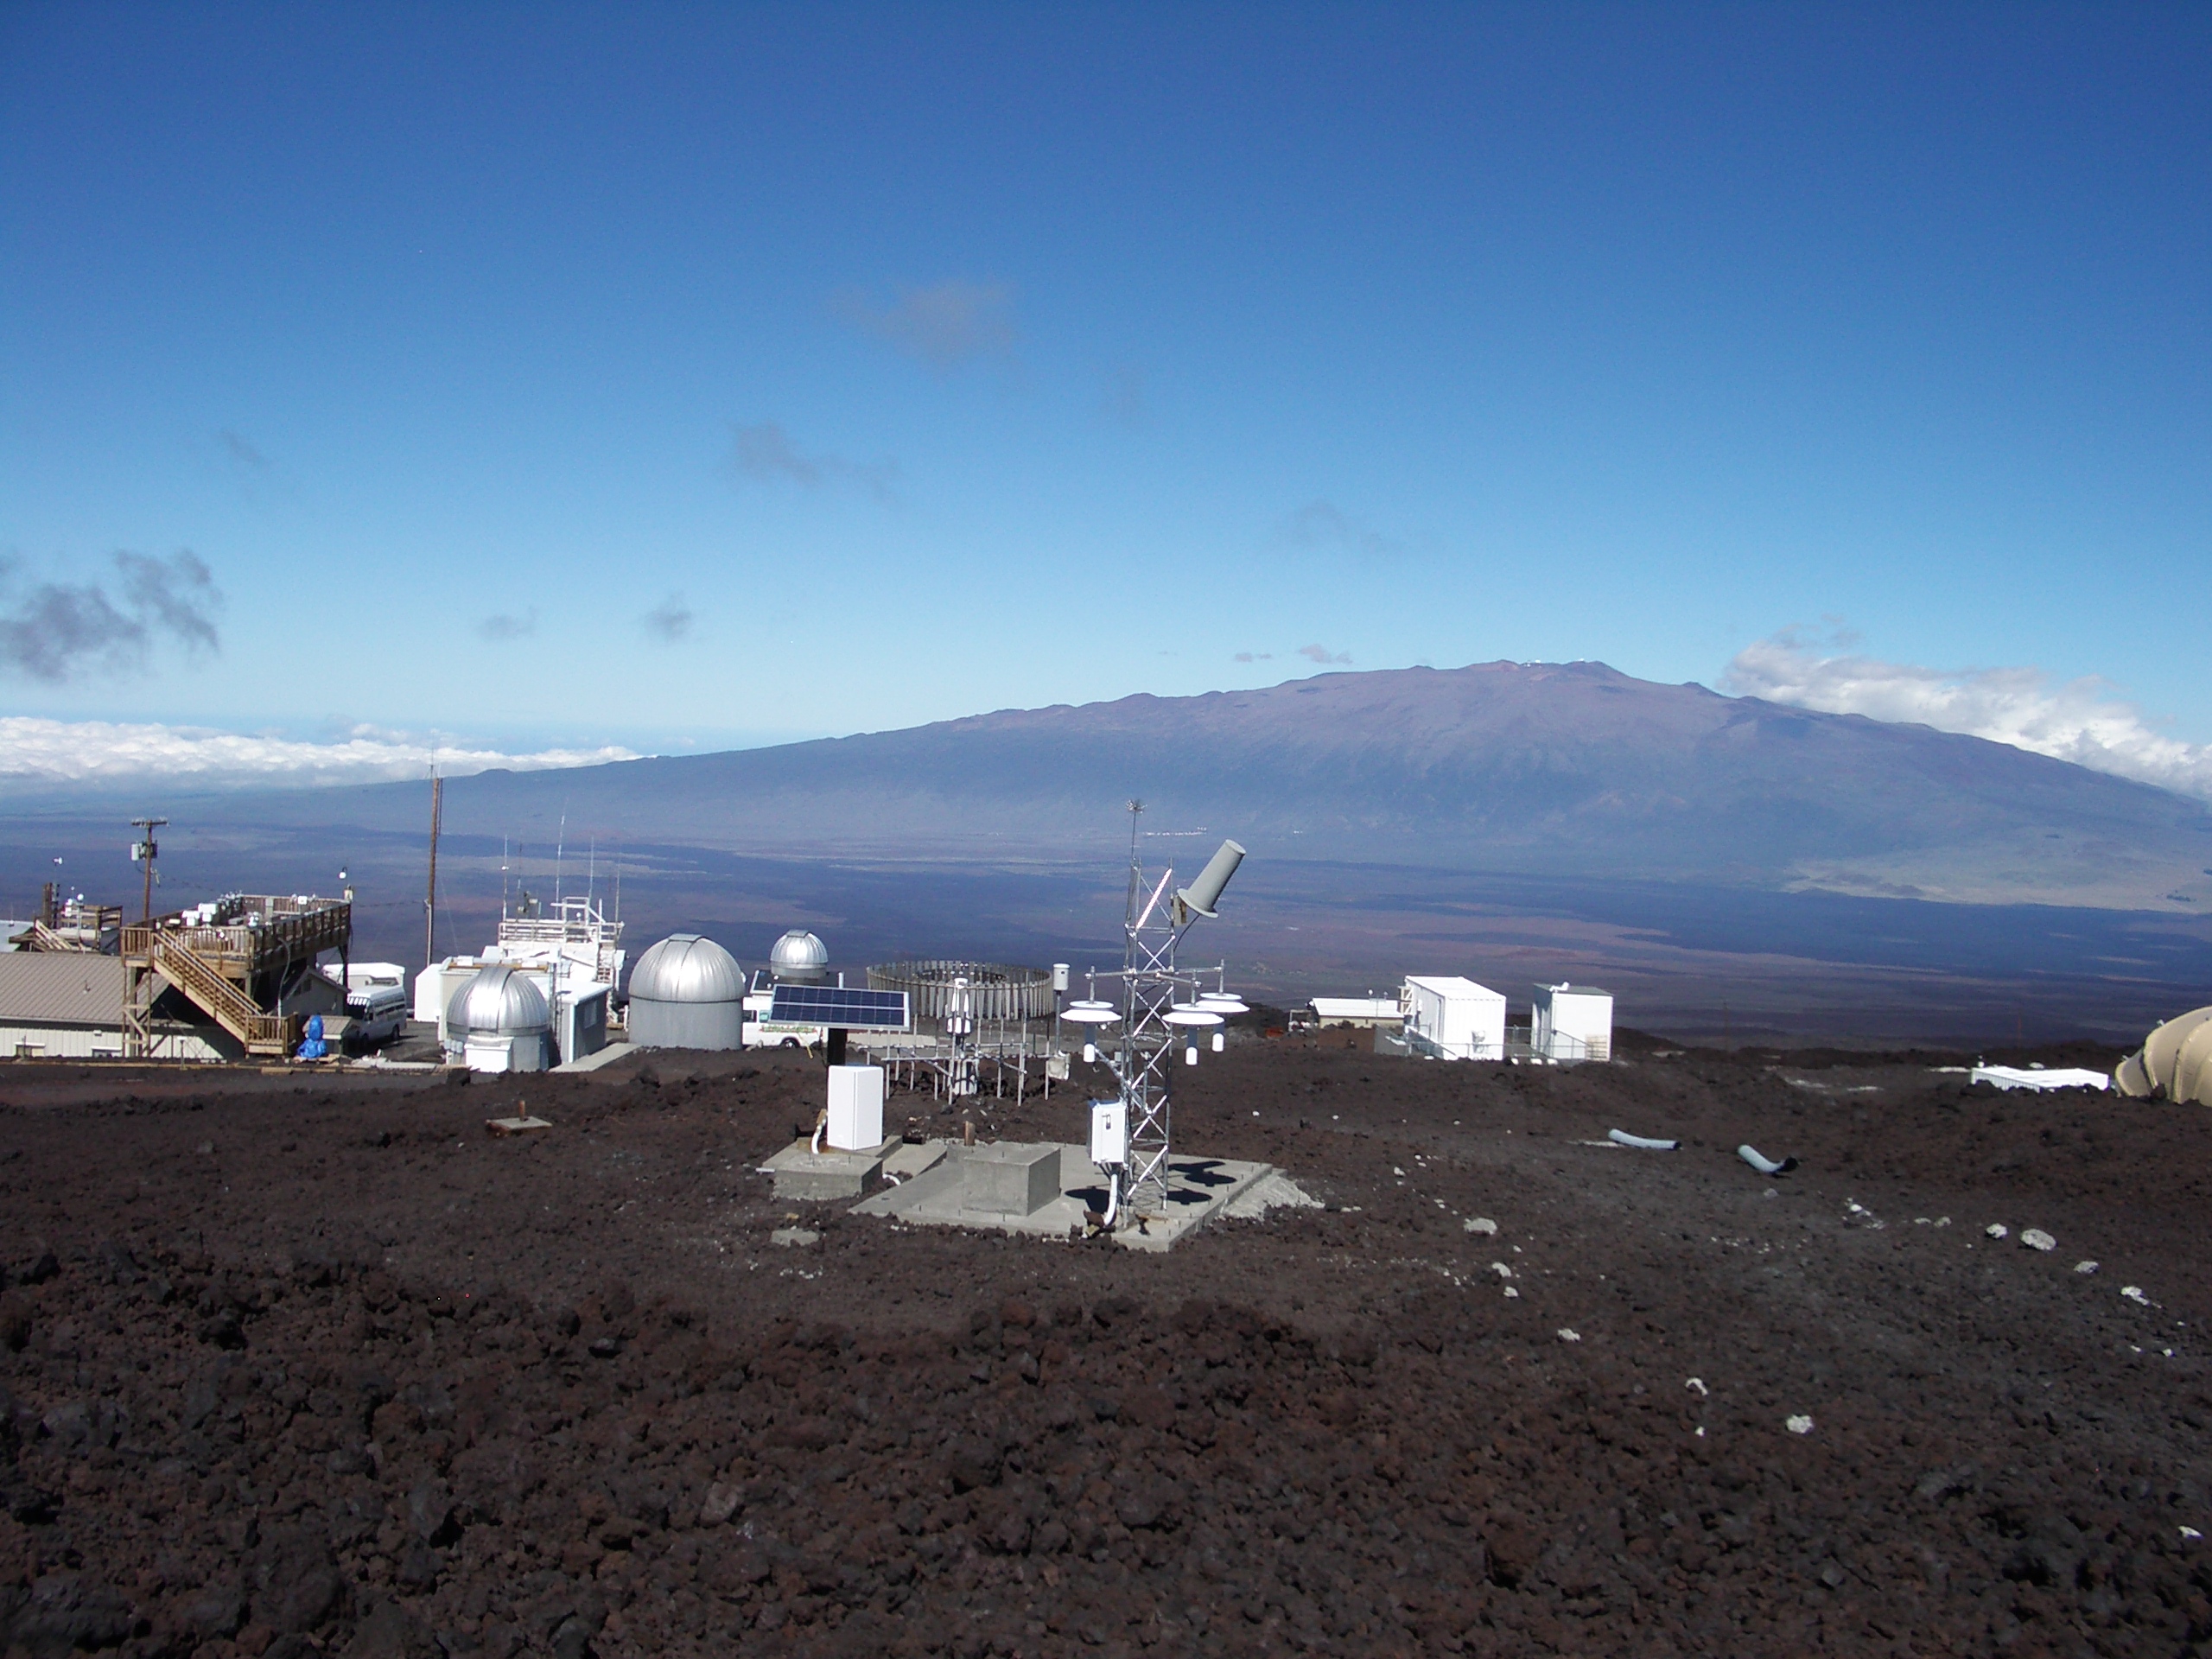 U.S. Climate Reference Network climate observing station on Mauna Loa in Hawaii  (Mauna Kea in the background).